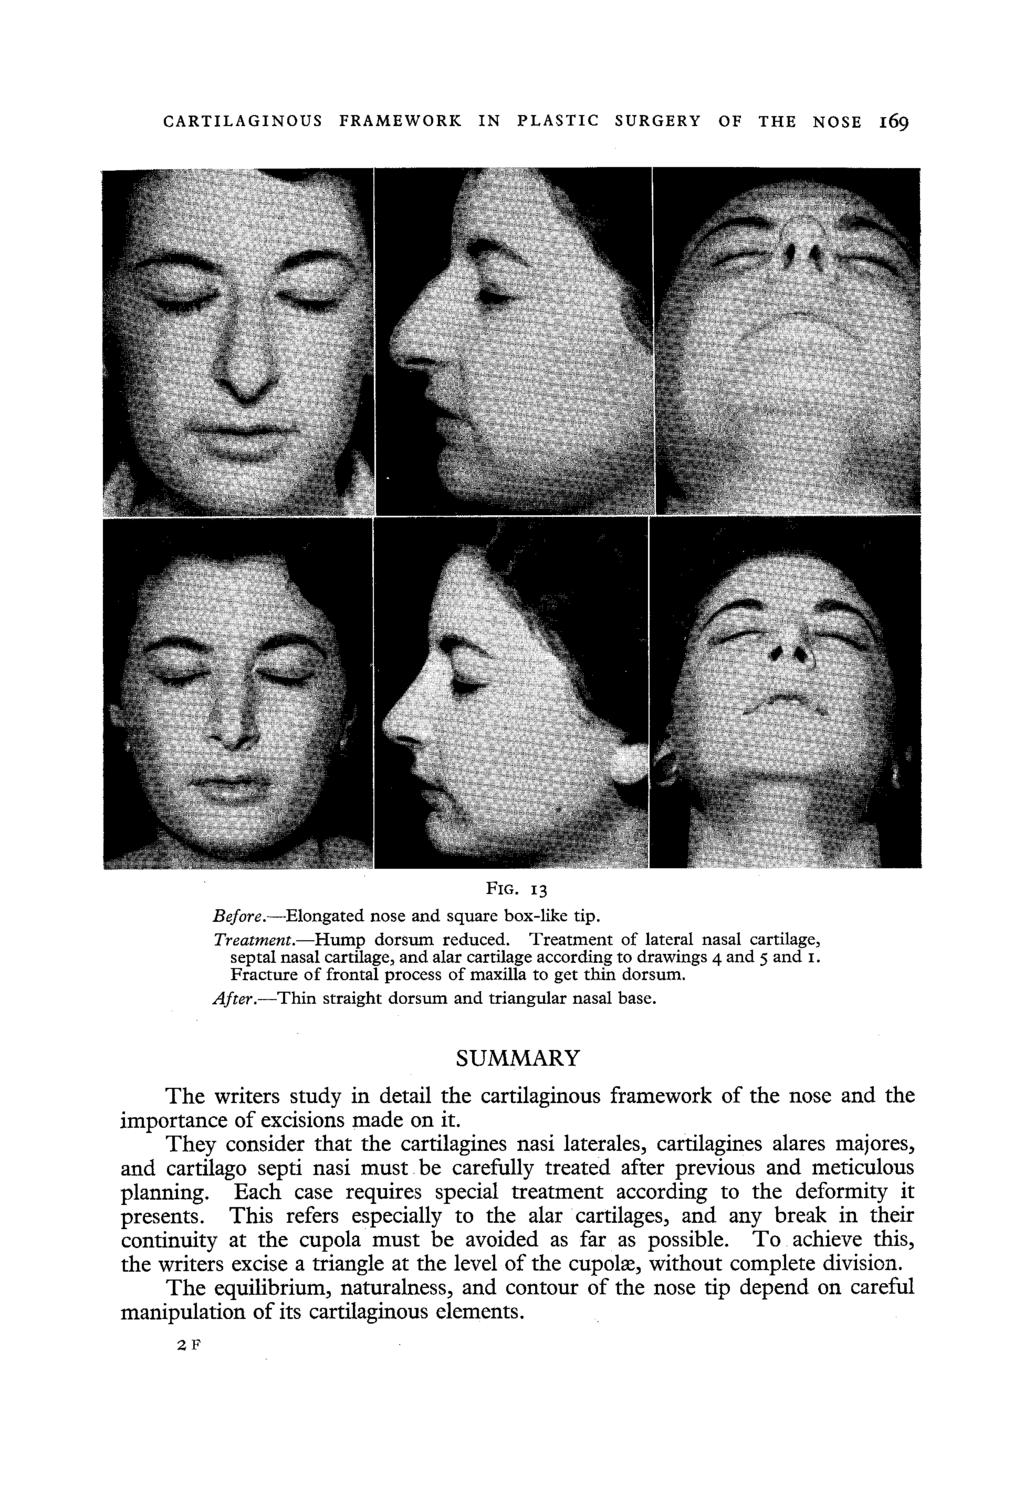 CARTILAGINOUS FRAMEWORK IN PLASTIC SURGERY OF THE NOSE 169 FIG. 13 Before.--Elongated nose and square box-like tip. Treatmem.--Hump dorsum reduced.